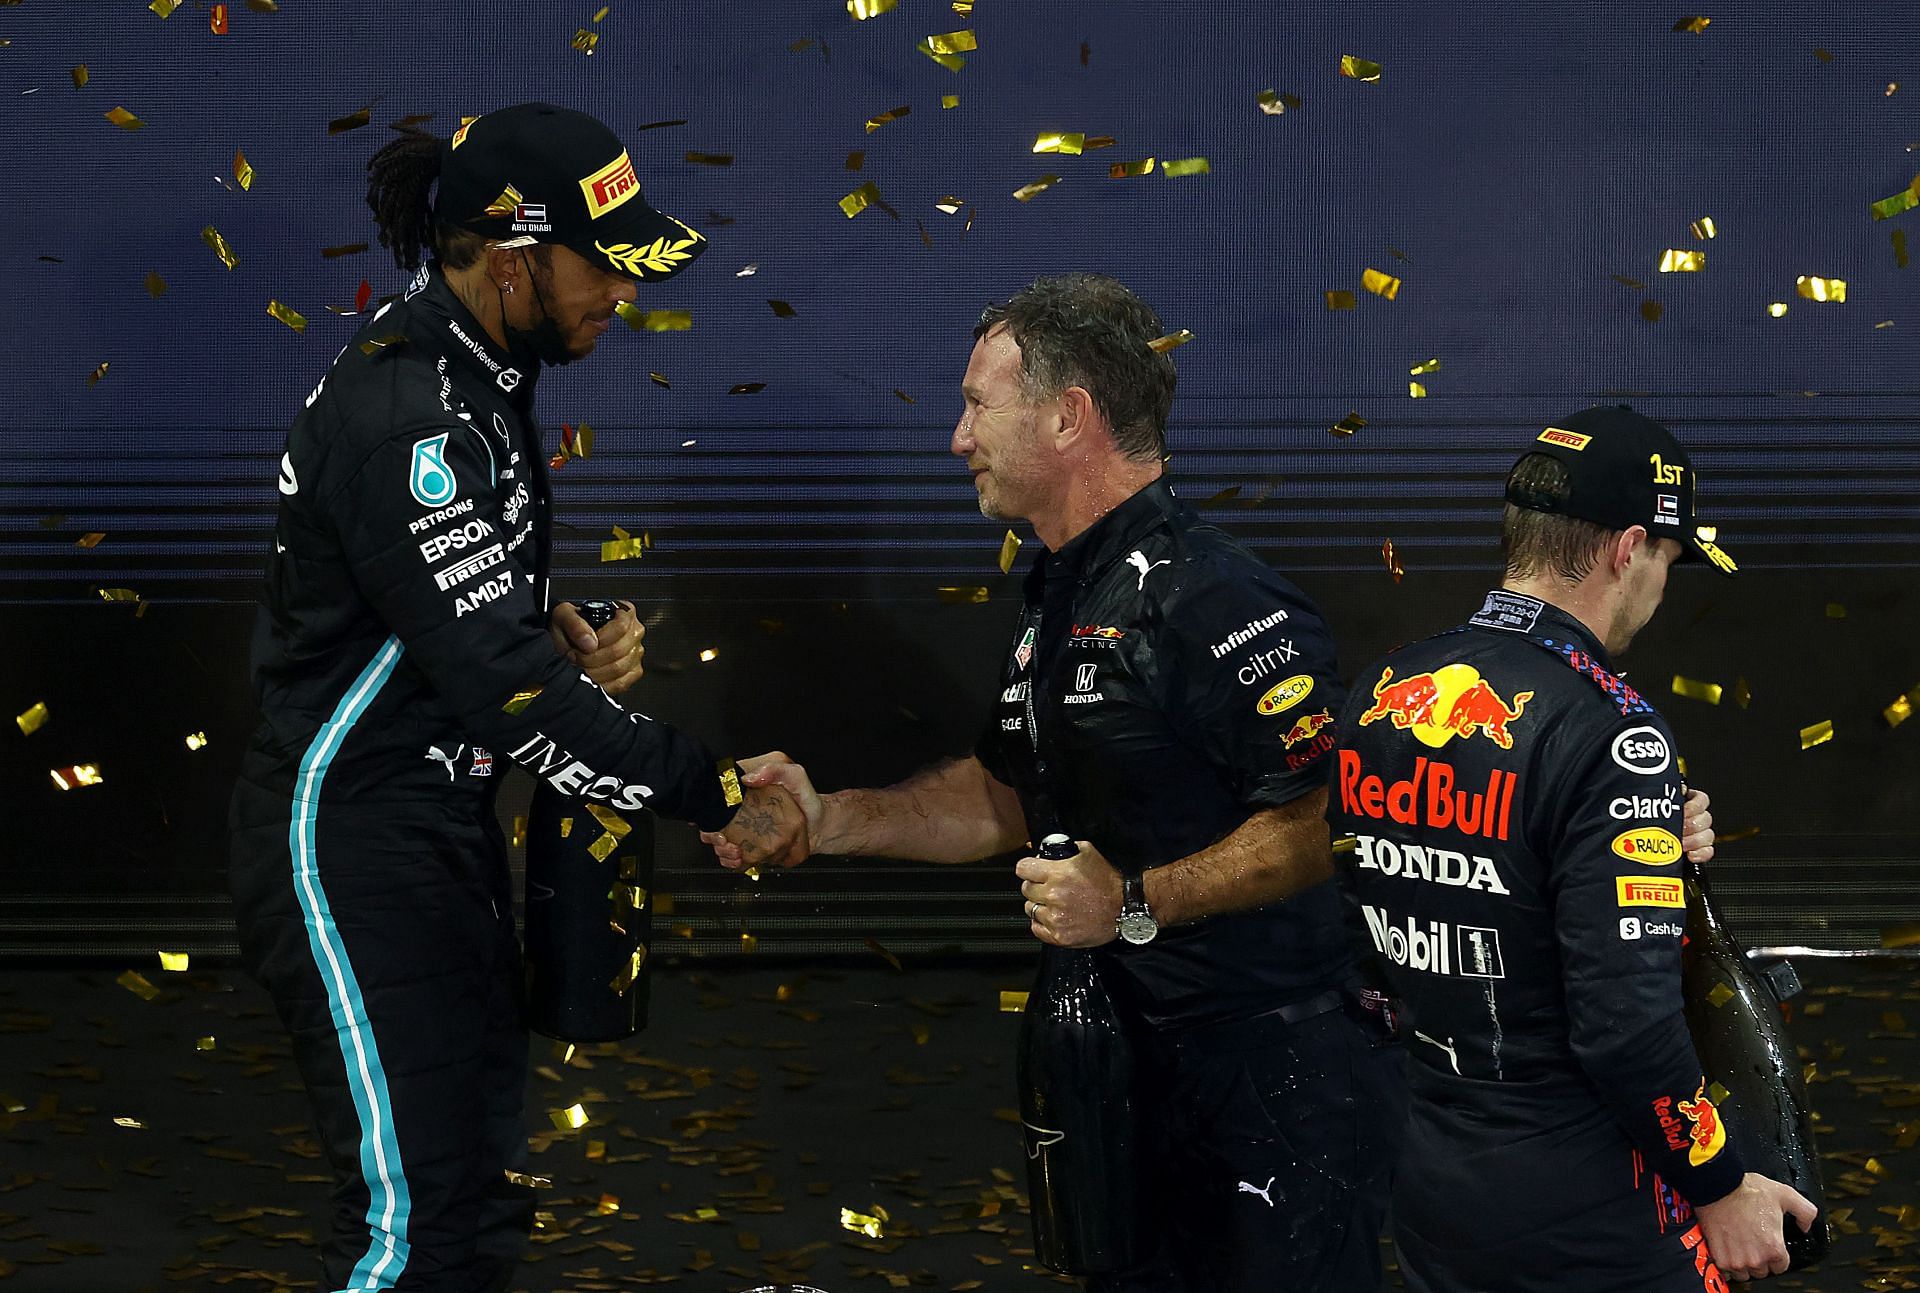 Lewis Hamilton (left) and Christian Horner (center) on the podium at the Abu Dhabi Grand Prix (Photo by Clive Rose/Getty Images)